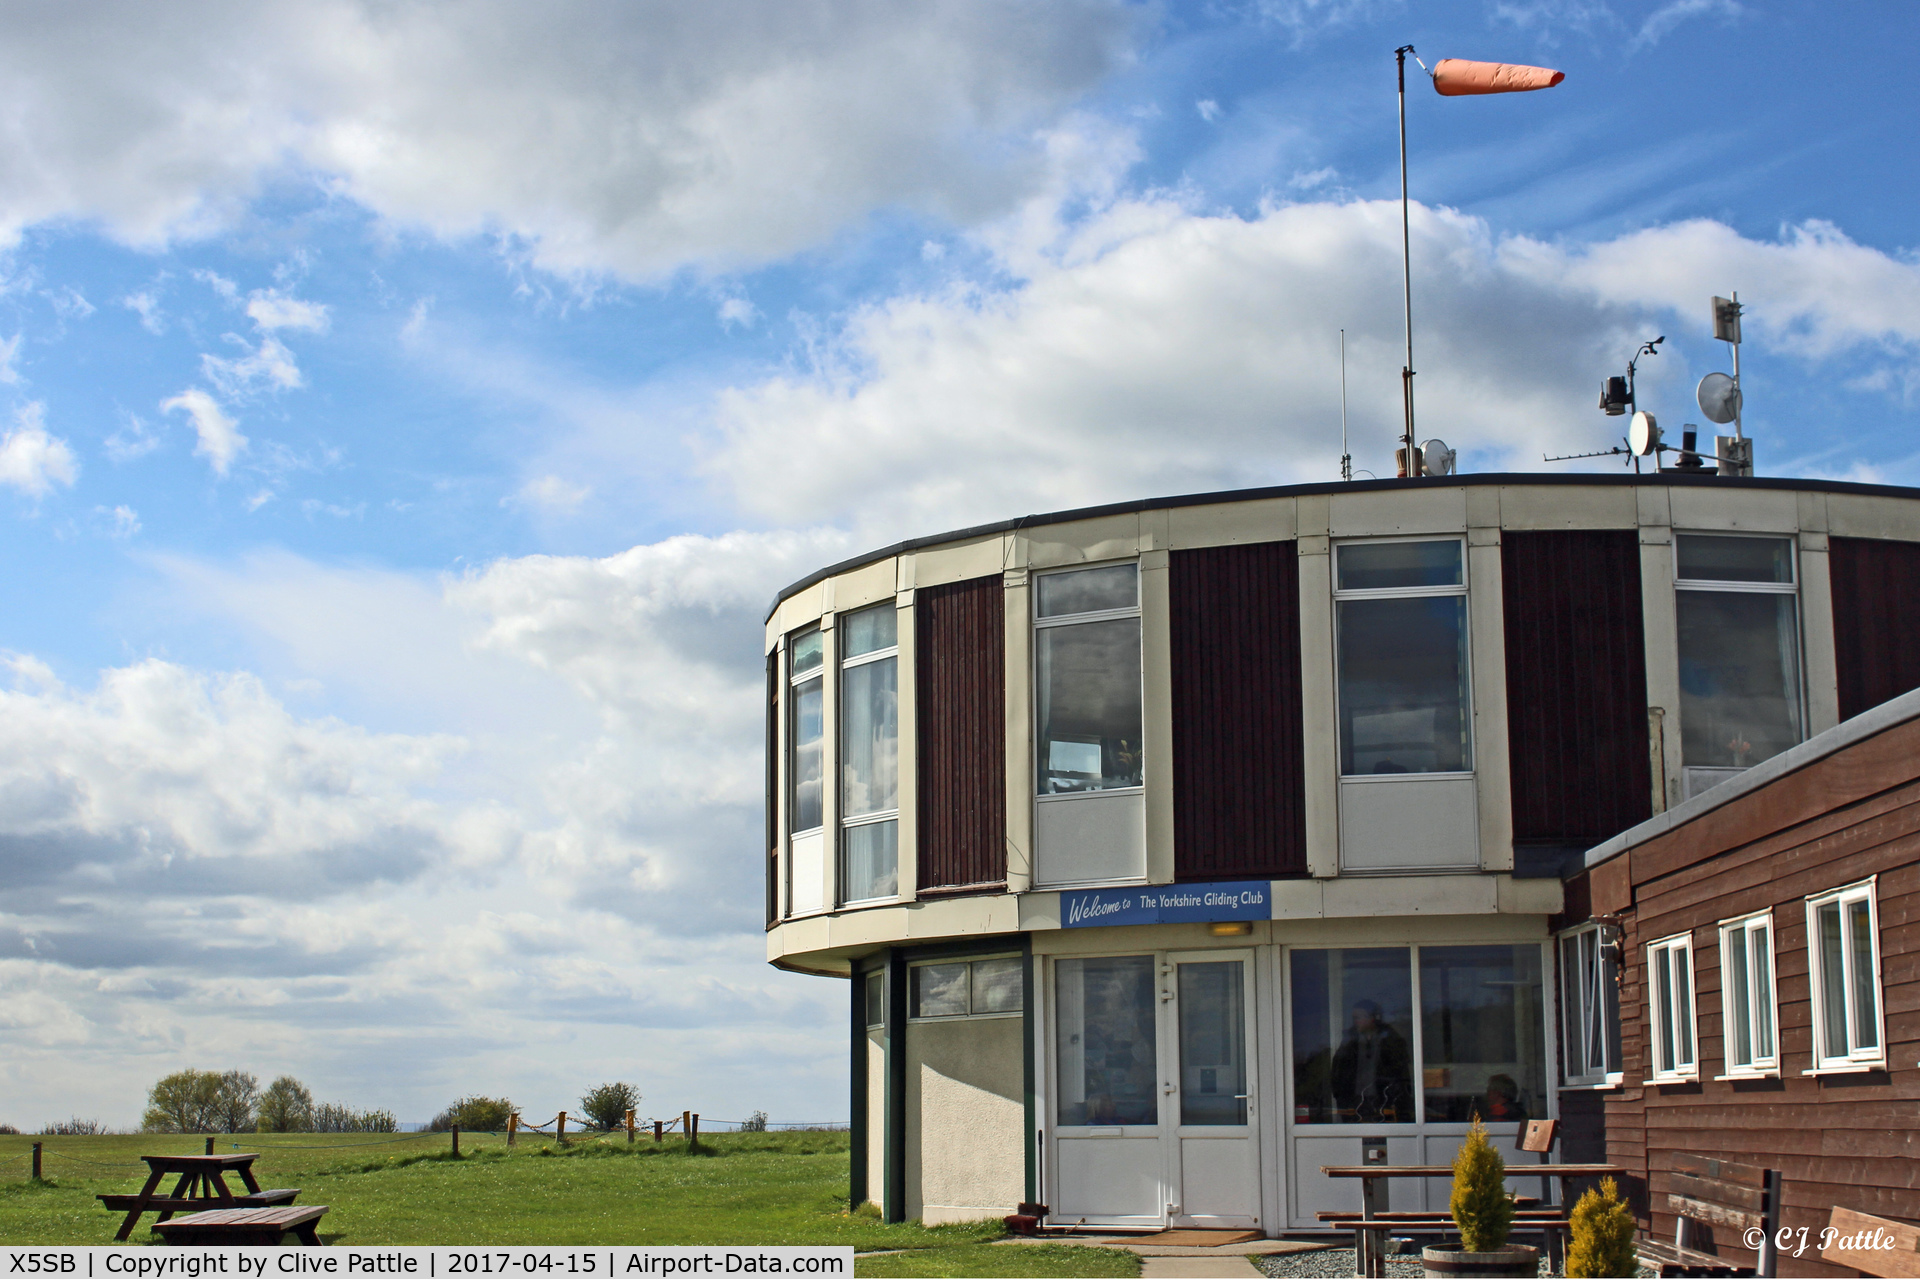 X5SB Airport - View of the Yorkshire Gliding Clubroom and Control Tower at X5SB Sutton Bank